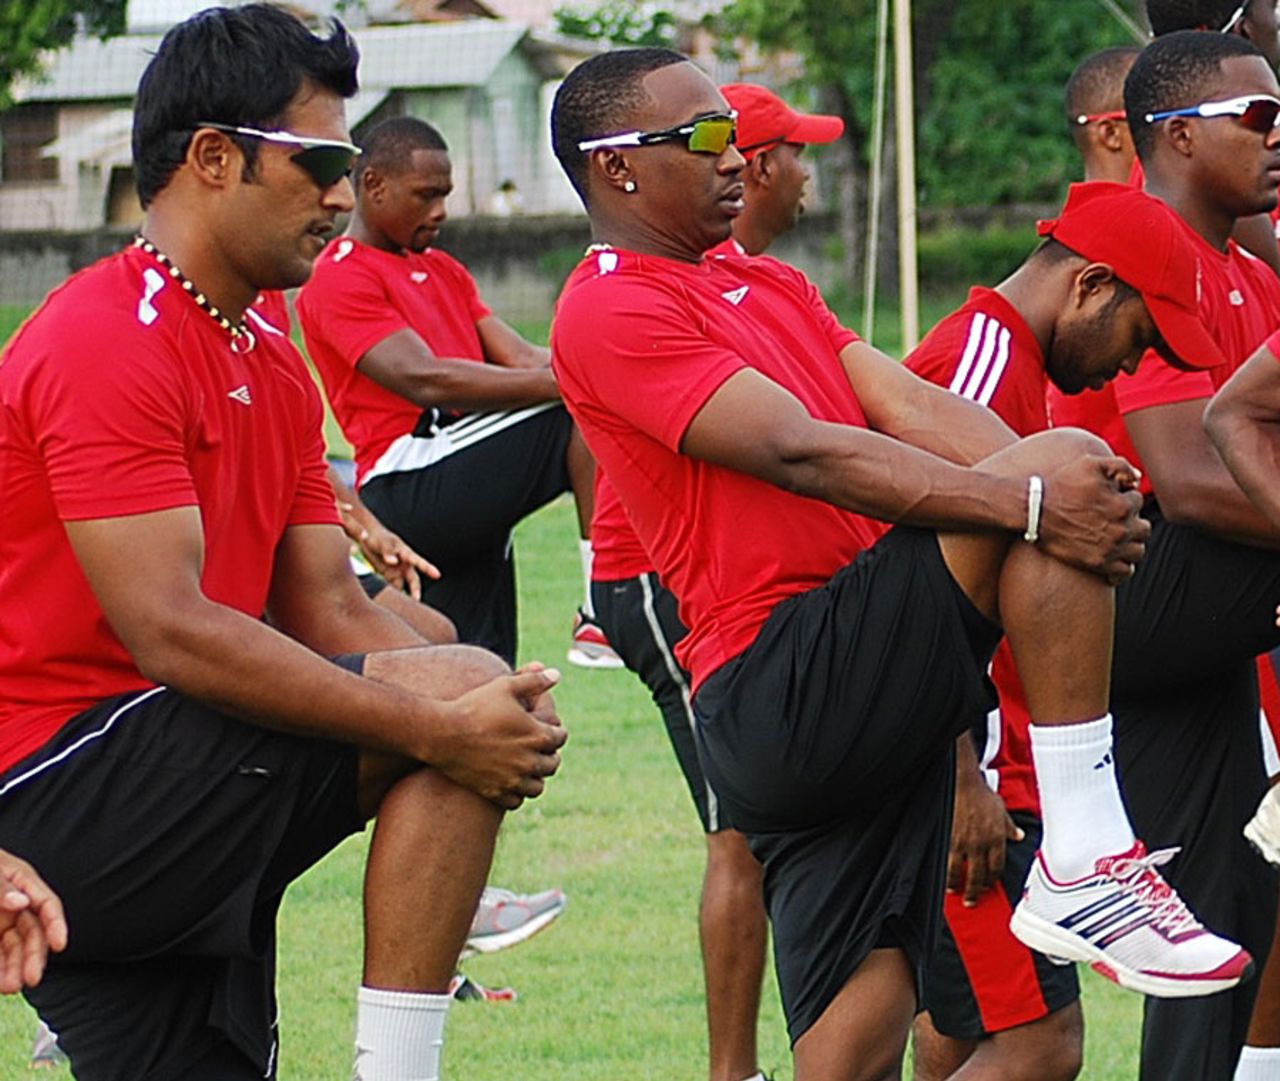 Daren Ganga and Dwayne Bravo go through the warm-up drills ahead of the Caribbean T20 event, July 20, 2010 